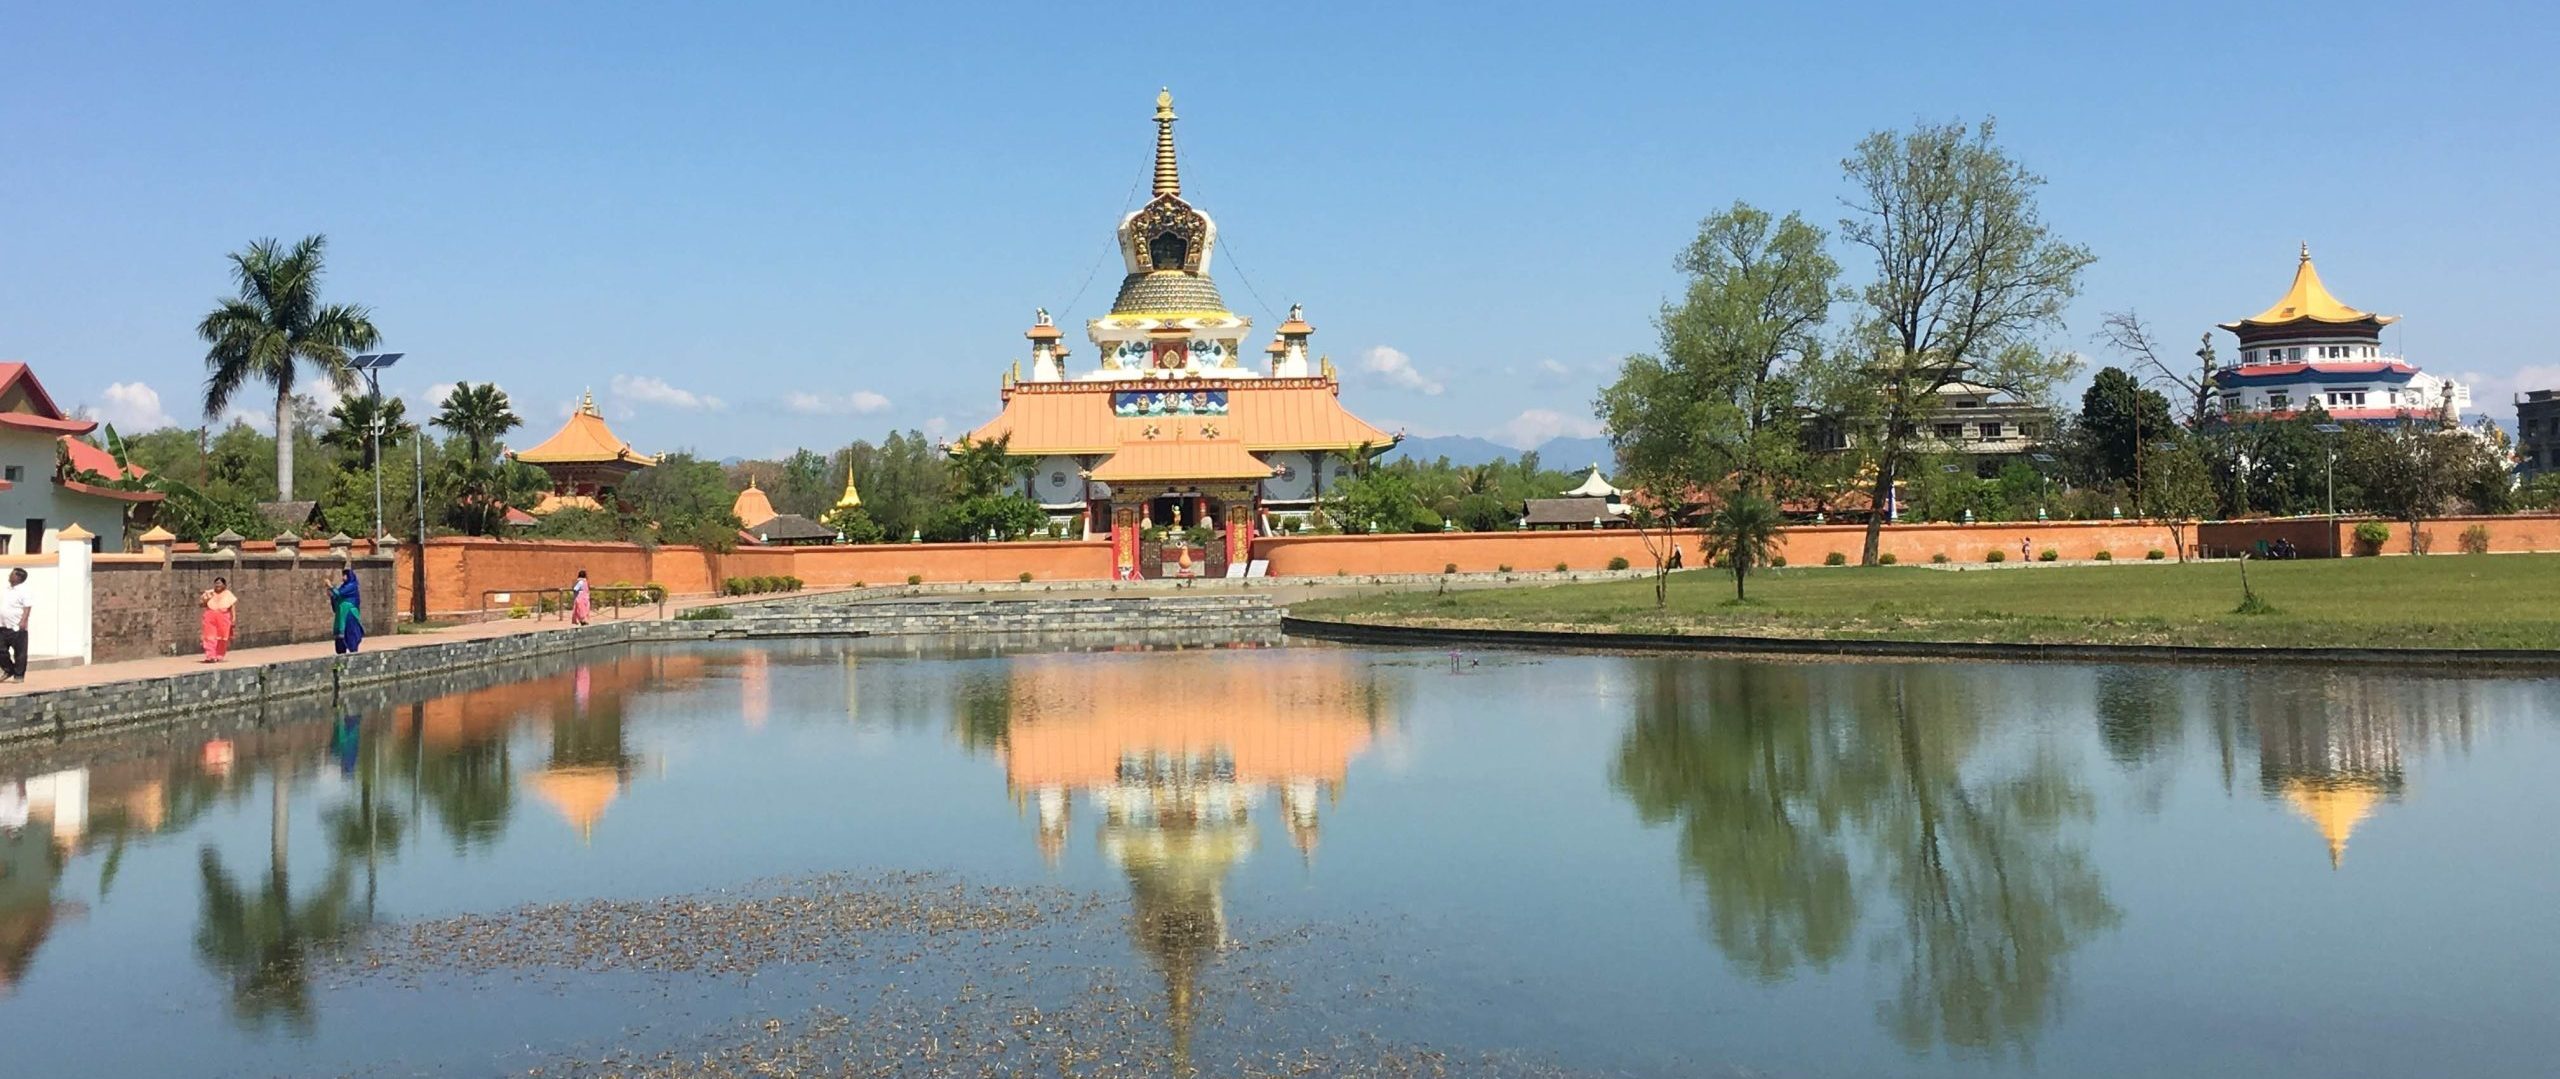 Lumbini – a Place of Enlightenment